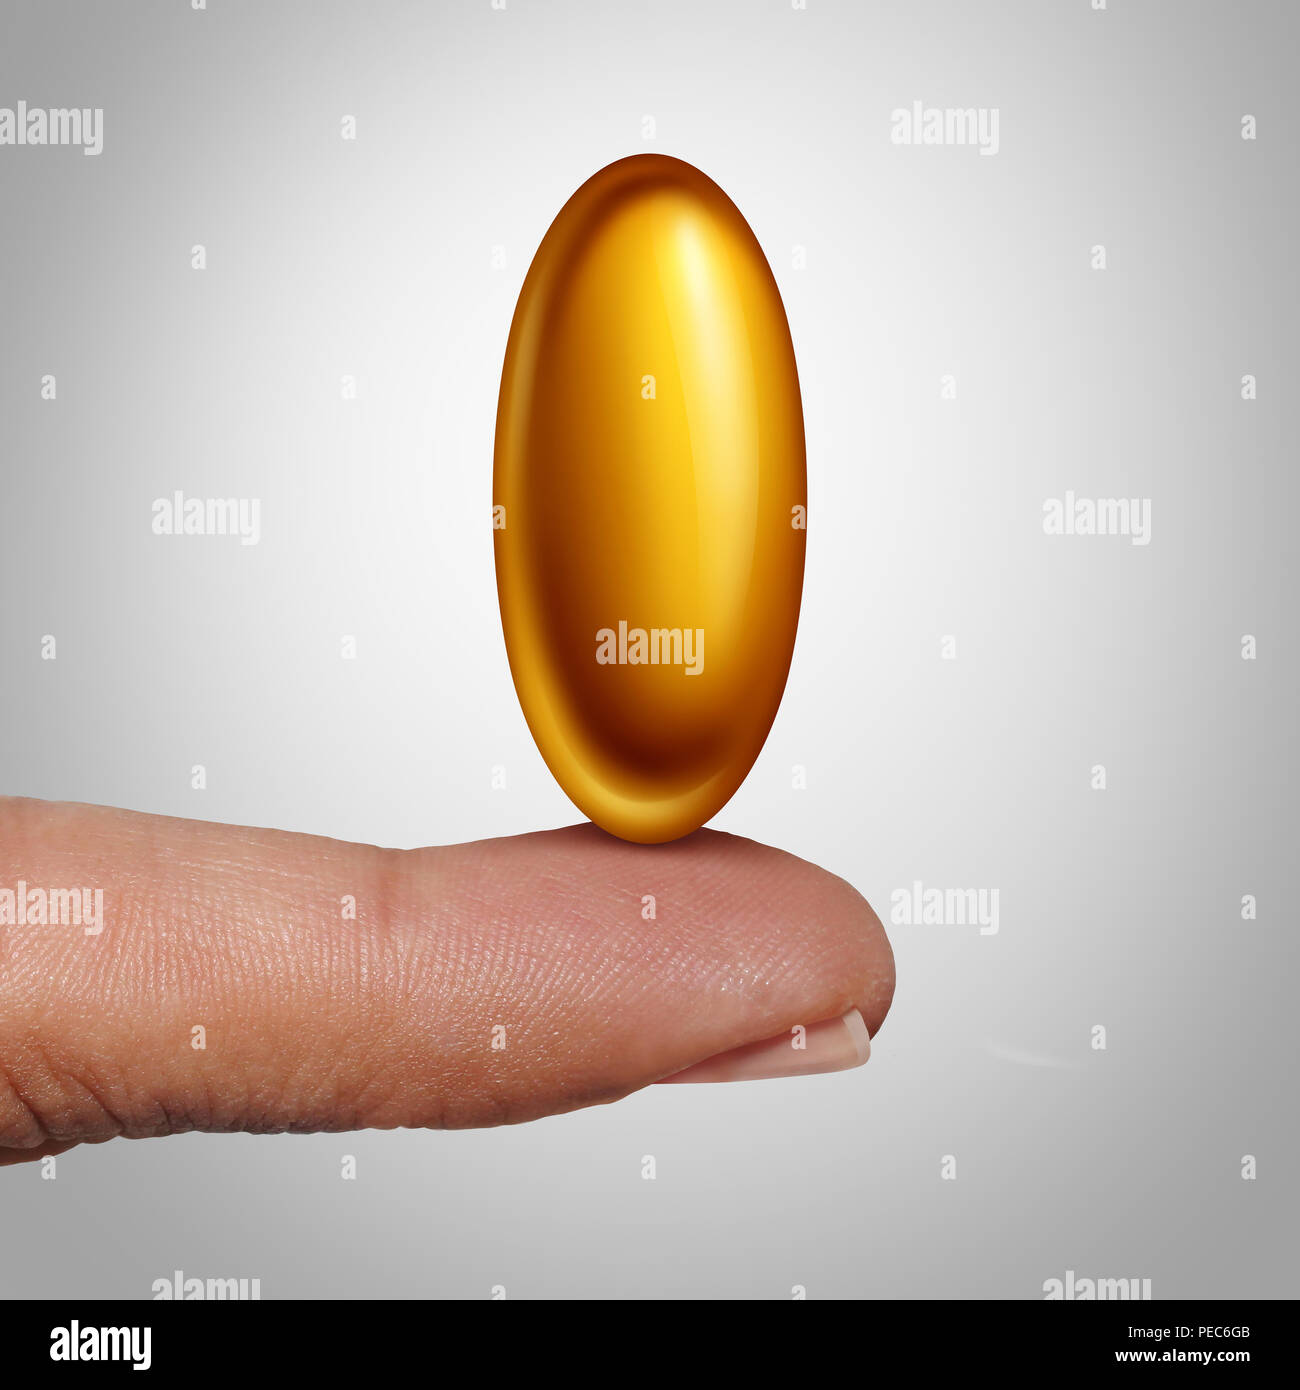 Healthy fish oil supplement and omega 3 fatty acid nutrient with a capsule pill as a natural health medicine with a human finger holding. Stock Photo